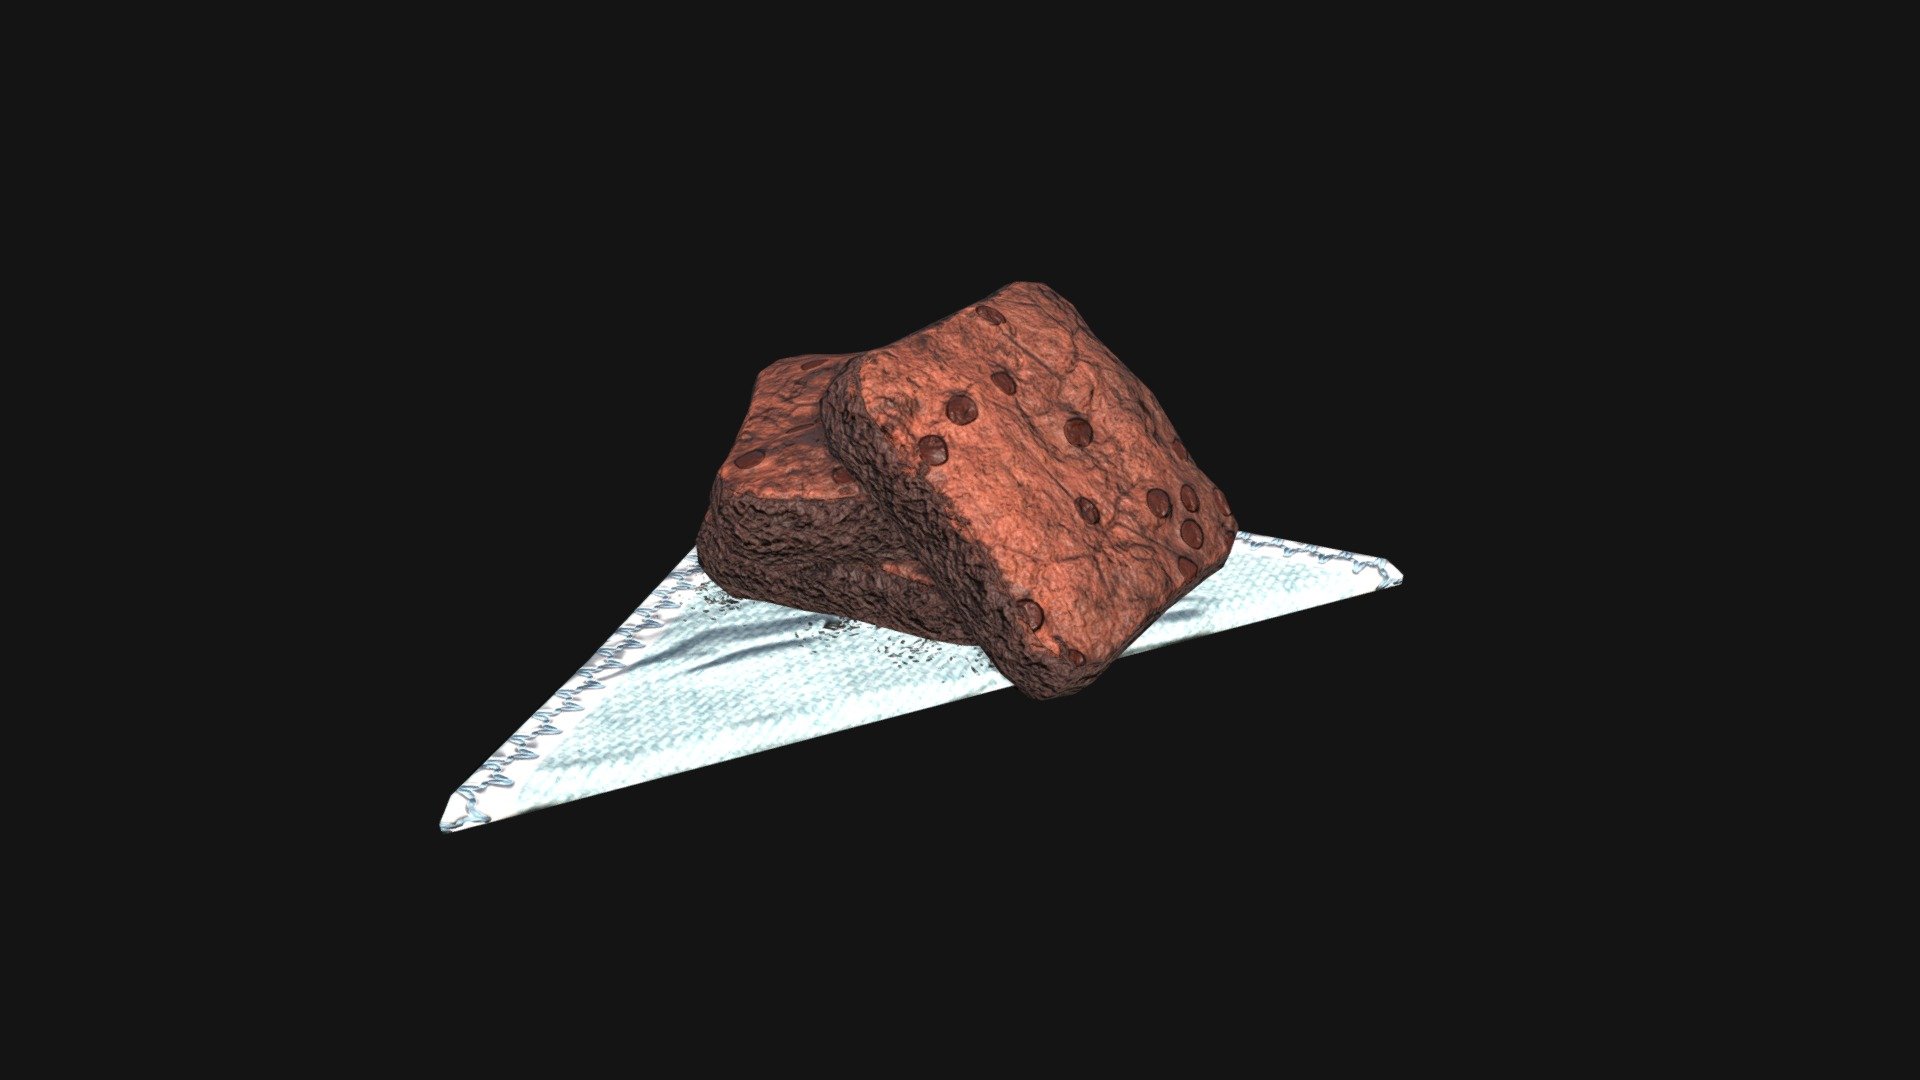 Brownies  3D Model. This model contains the Brownies  itself 

All modeled in Maya, textured with Substance Painter.

The model was built to scale and is UV unwrapped properly. Contains one 4K texture set

⦁    1012 tris. 

⦁    Contains: .FBX .OBJ and .DAE

⦁    Model has clean topology. No Ngons.

⦁    Built to scale

⦁    Unwrapped UV Map

⦁    4K Texture set

⦁    High quality details

⦁    Based on real life references

⦁    Renders done in Marmoset Toolbag

Polycount: 

Verts 514

Edges 1038

Faces 532

Tris 1012

If you have any questions please feel free to ask me 3d model